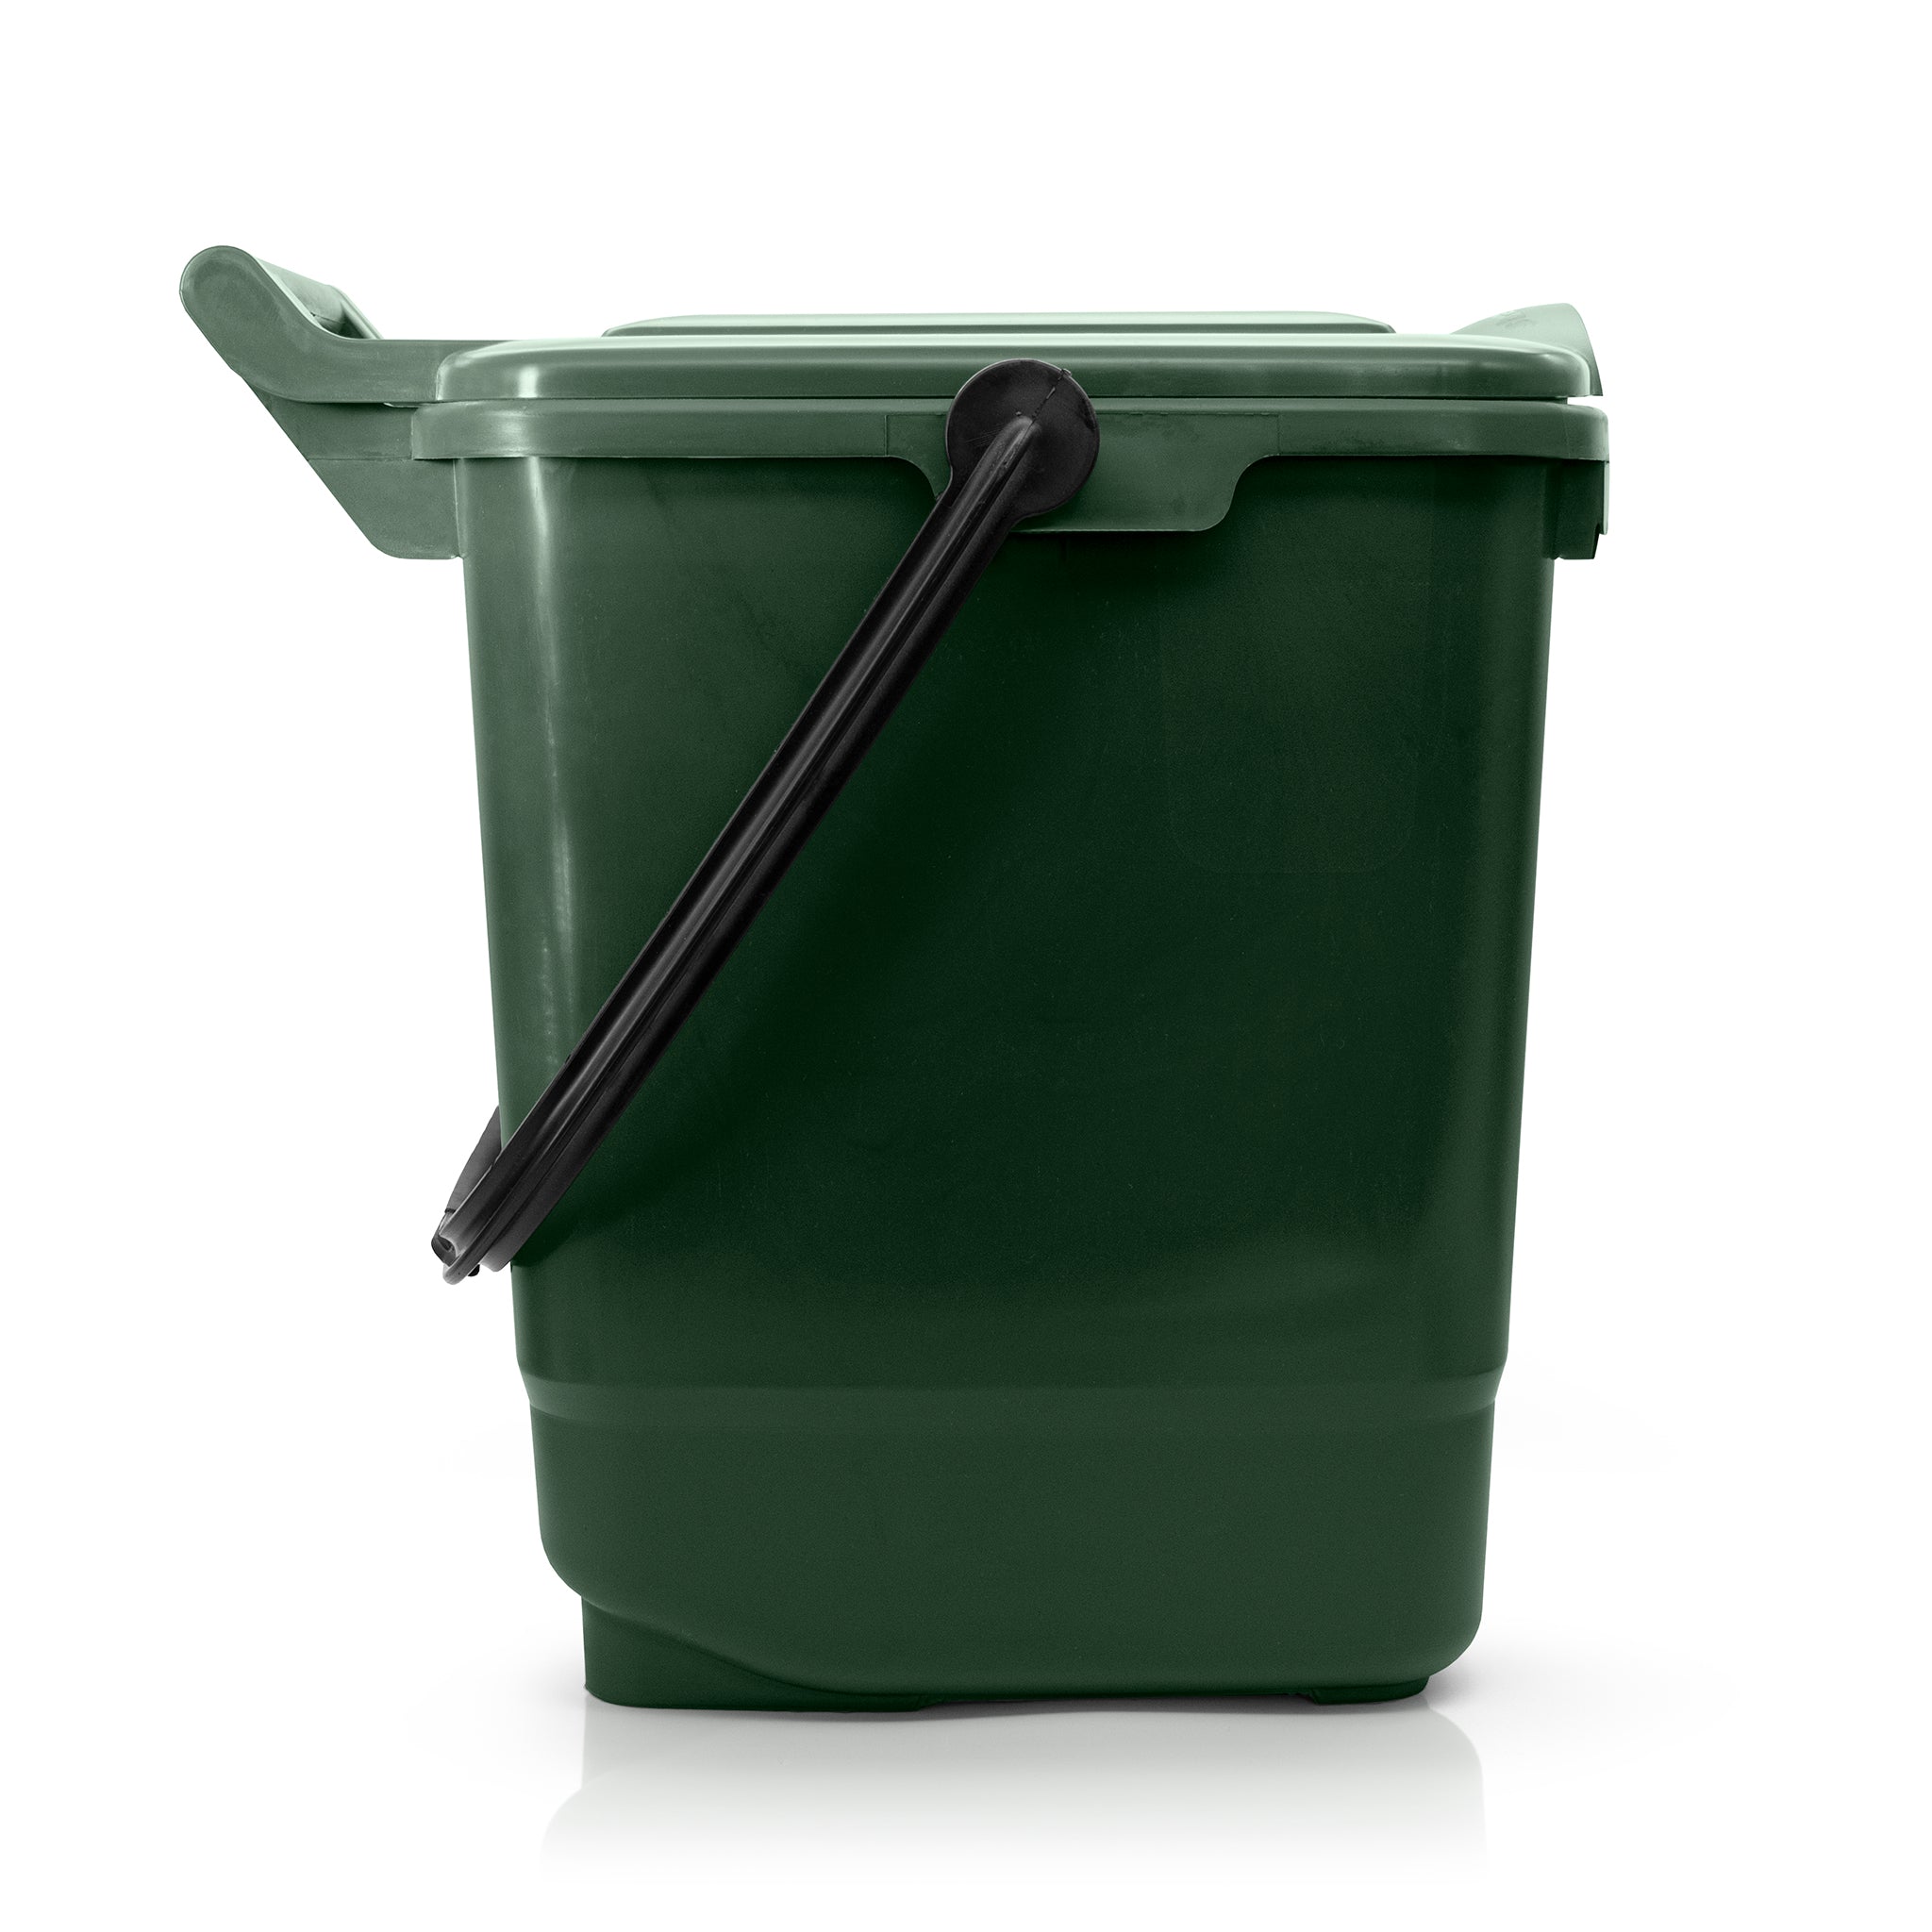 100% recycled plastic compost bin with lockable lid and handle